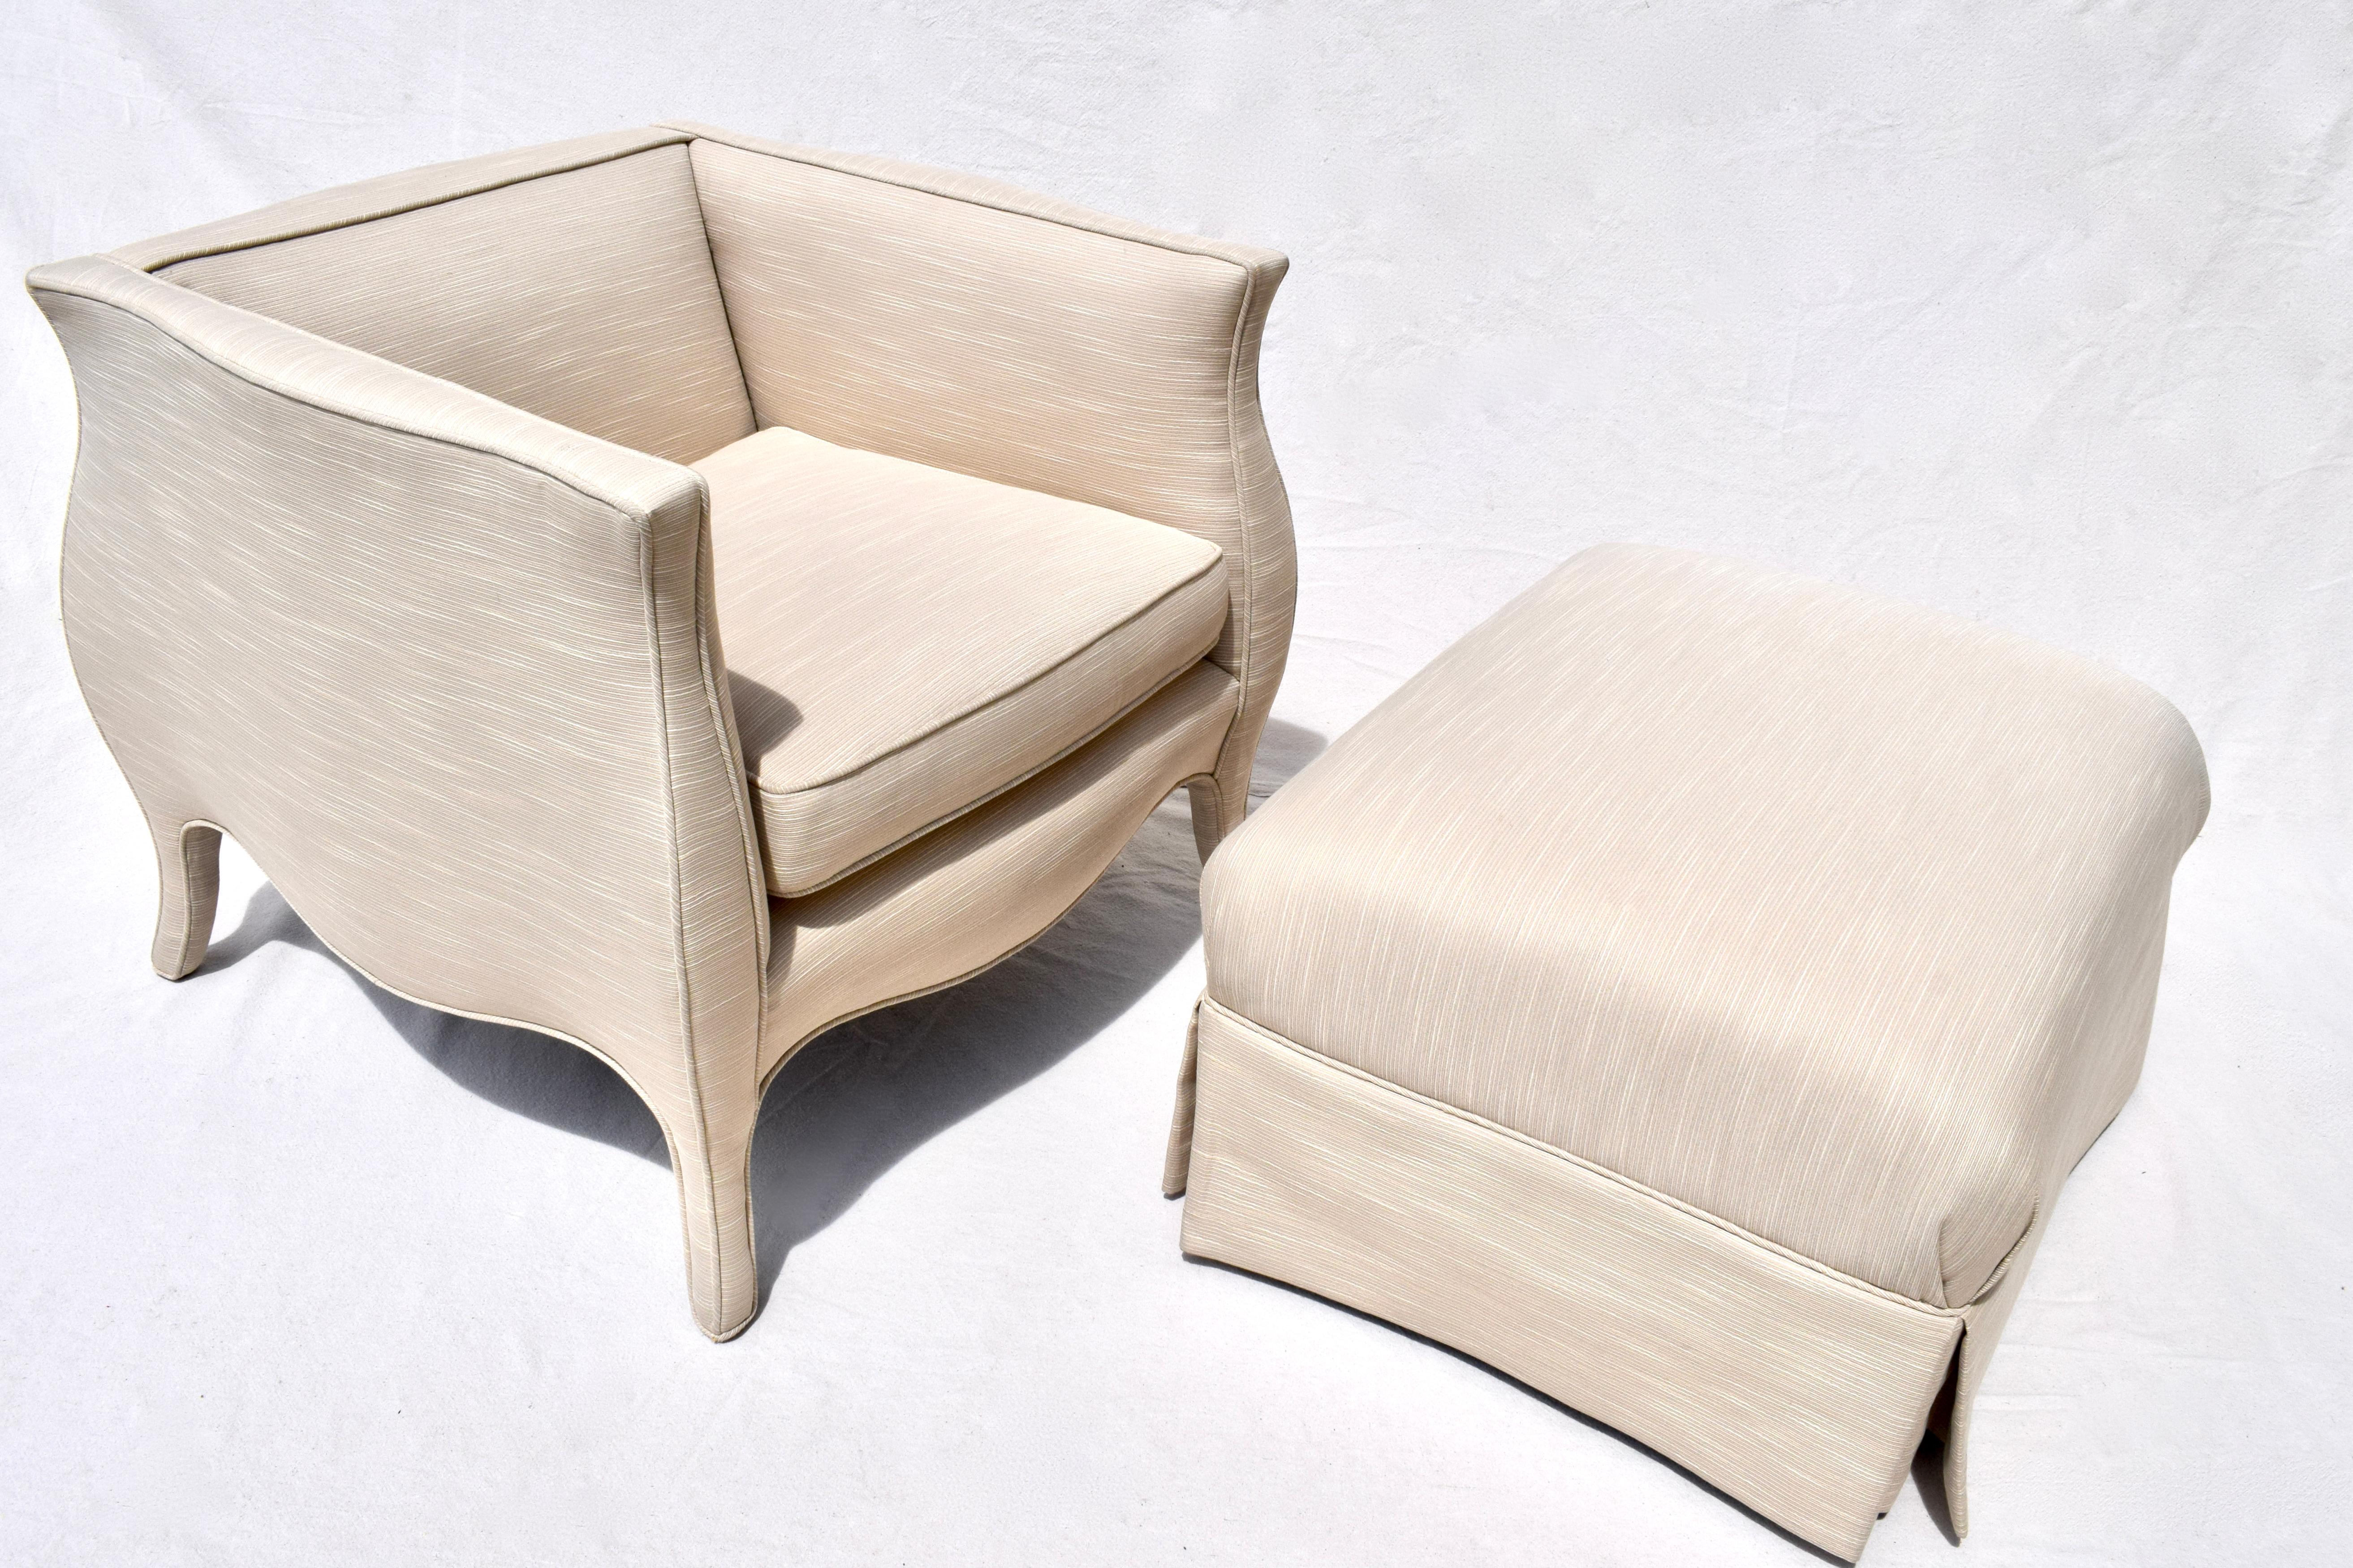 An unusual custom chair & ottoman set by Richard Himmel c. 1970s in excellent vintage condition as if frozen in time. Newer upholstery in rarely used condition.
Ottoman dimensions: 28